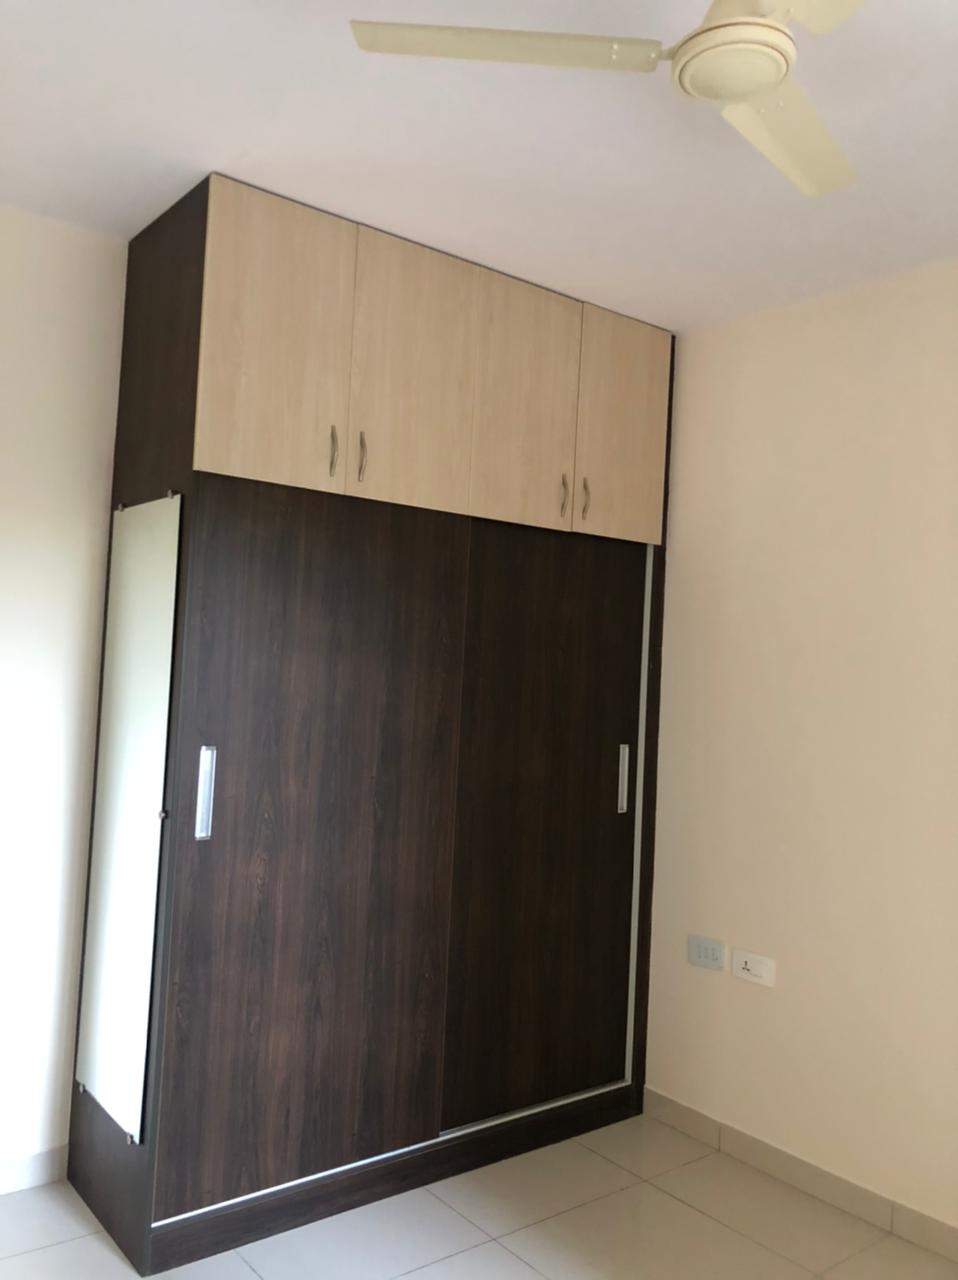 2 BHK Residential Apartment for Lease Only at JAML2 - 2377 in Nandini Layout